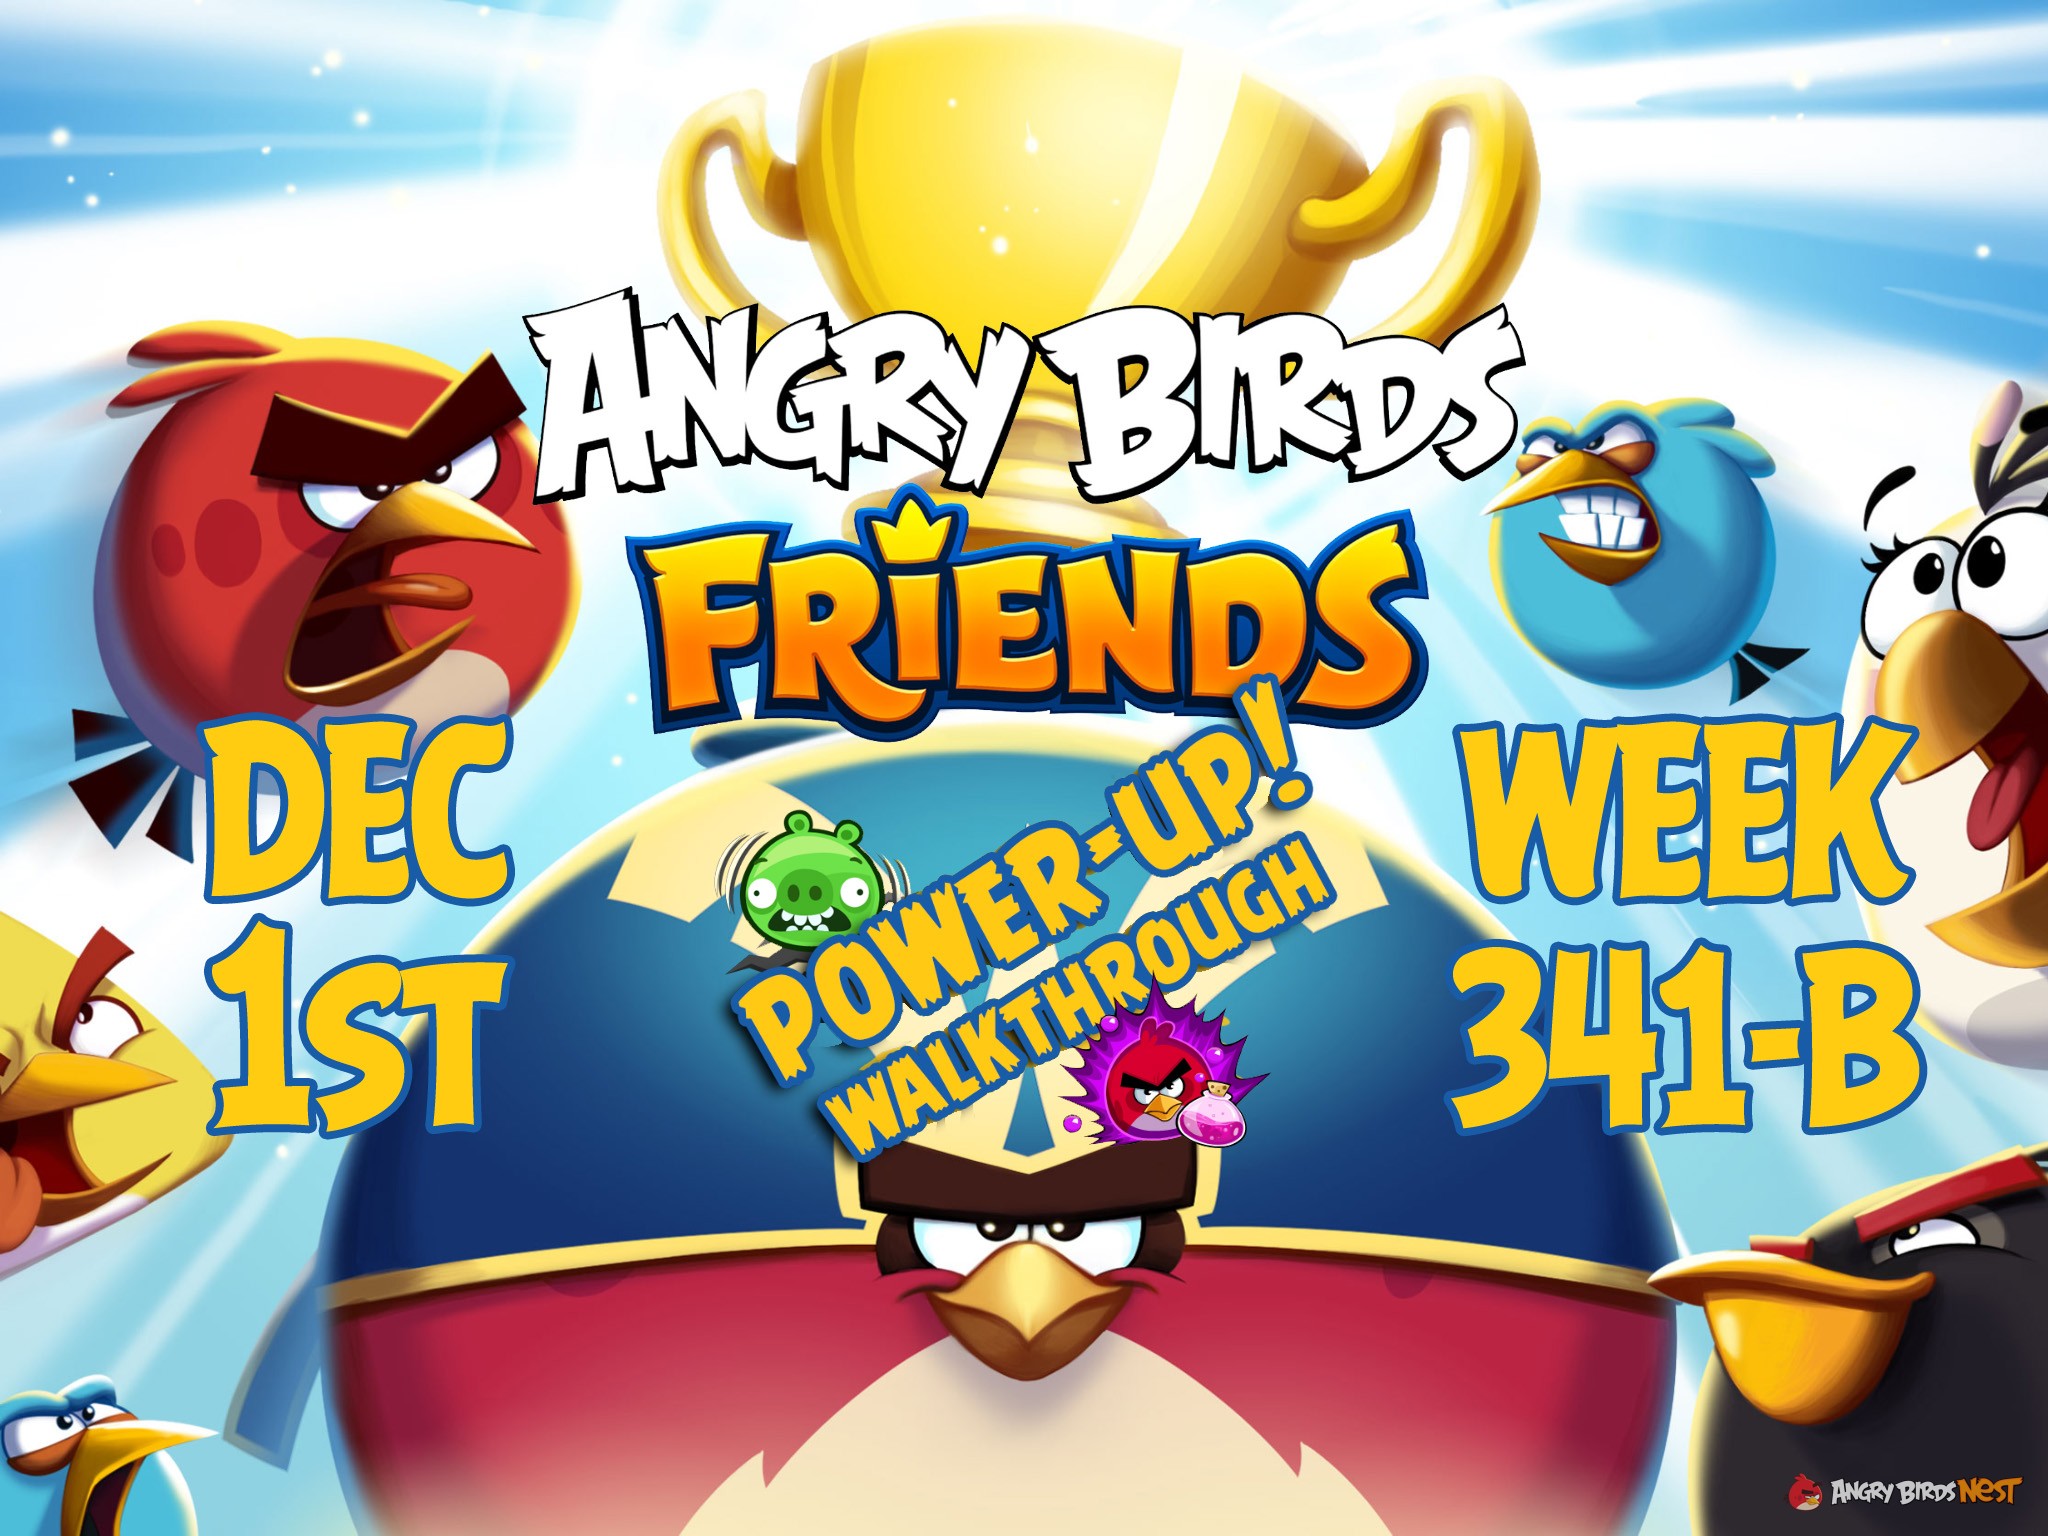 Angry-Birds-Friends-Tournament-Week-341-B-Feature-Image-PU